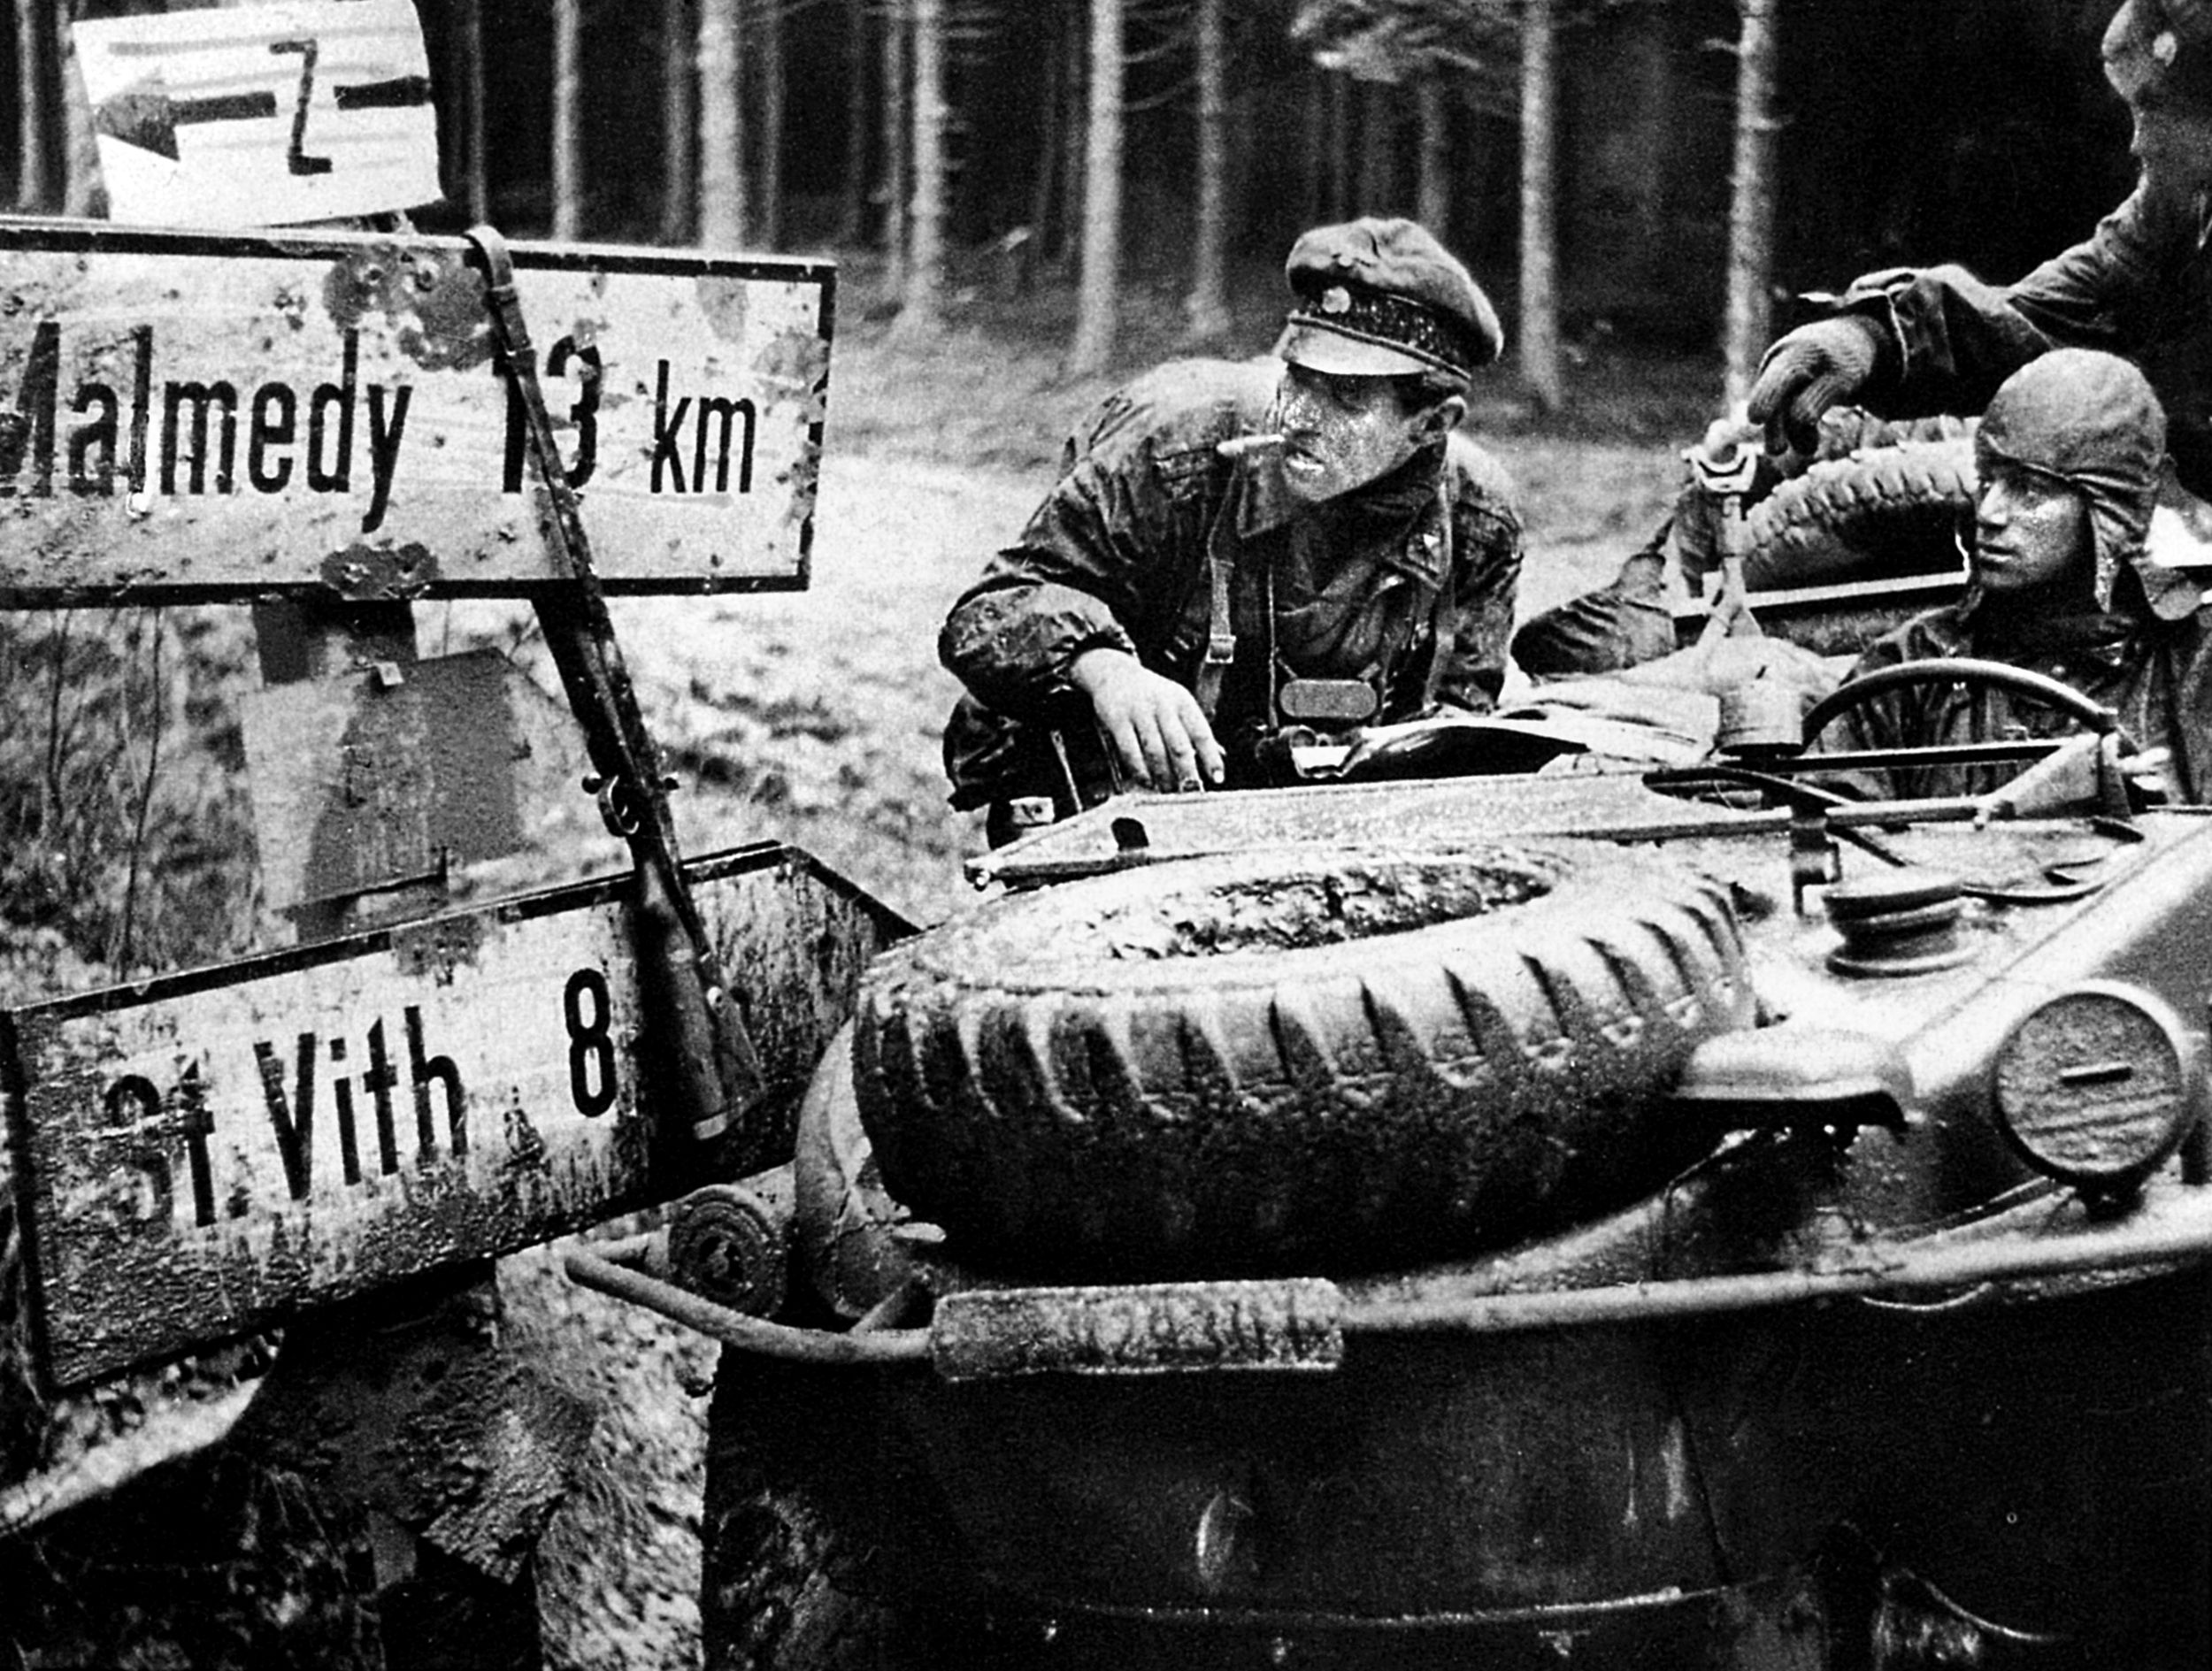 Men of Kampfgruppe Peiper pause to consult a map and road signs during the opening hours of the unit’s attack. The officer has often been misidentified as Peiper in this captured war photo. 